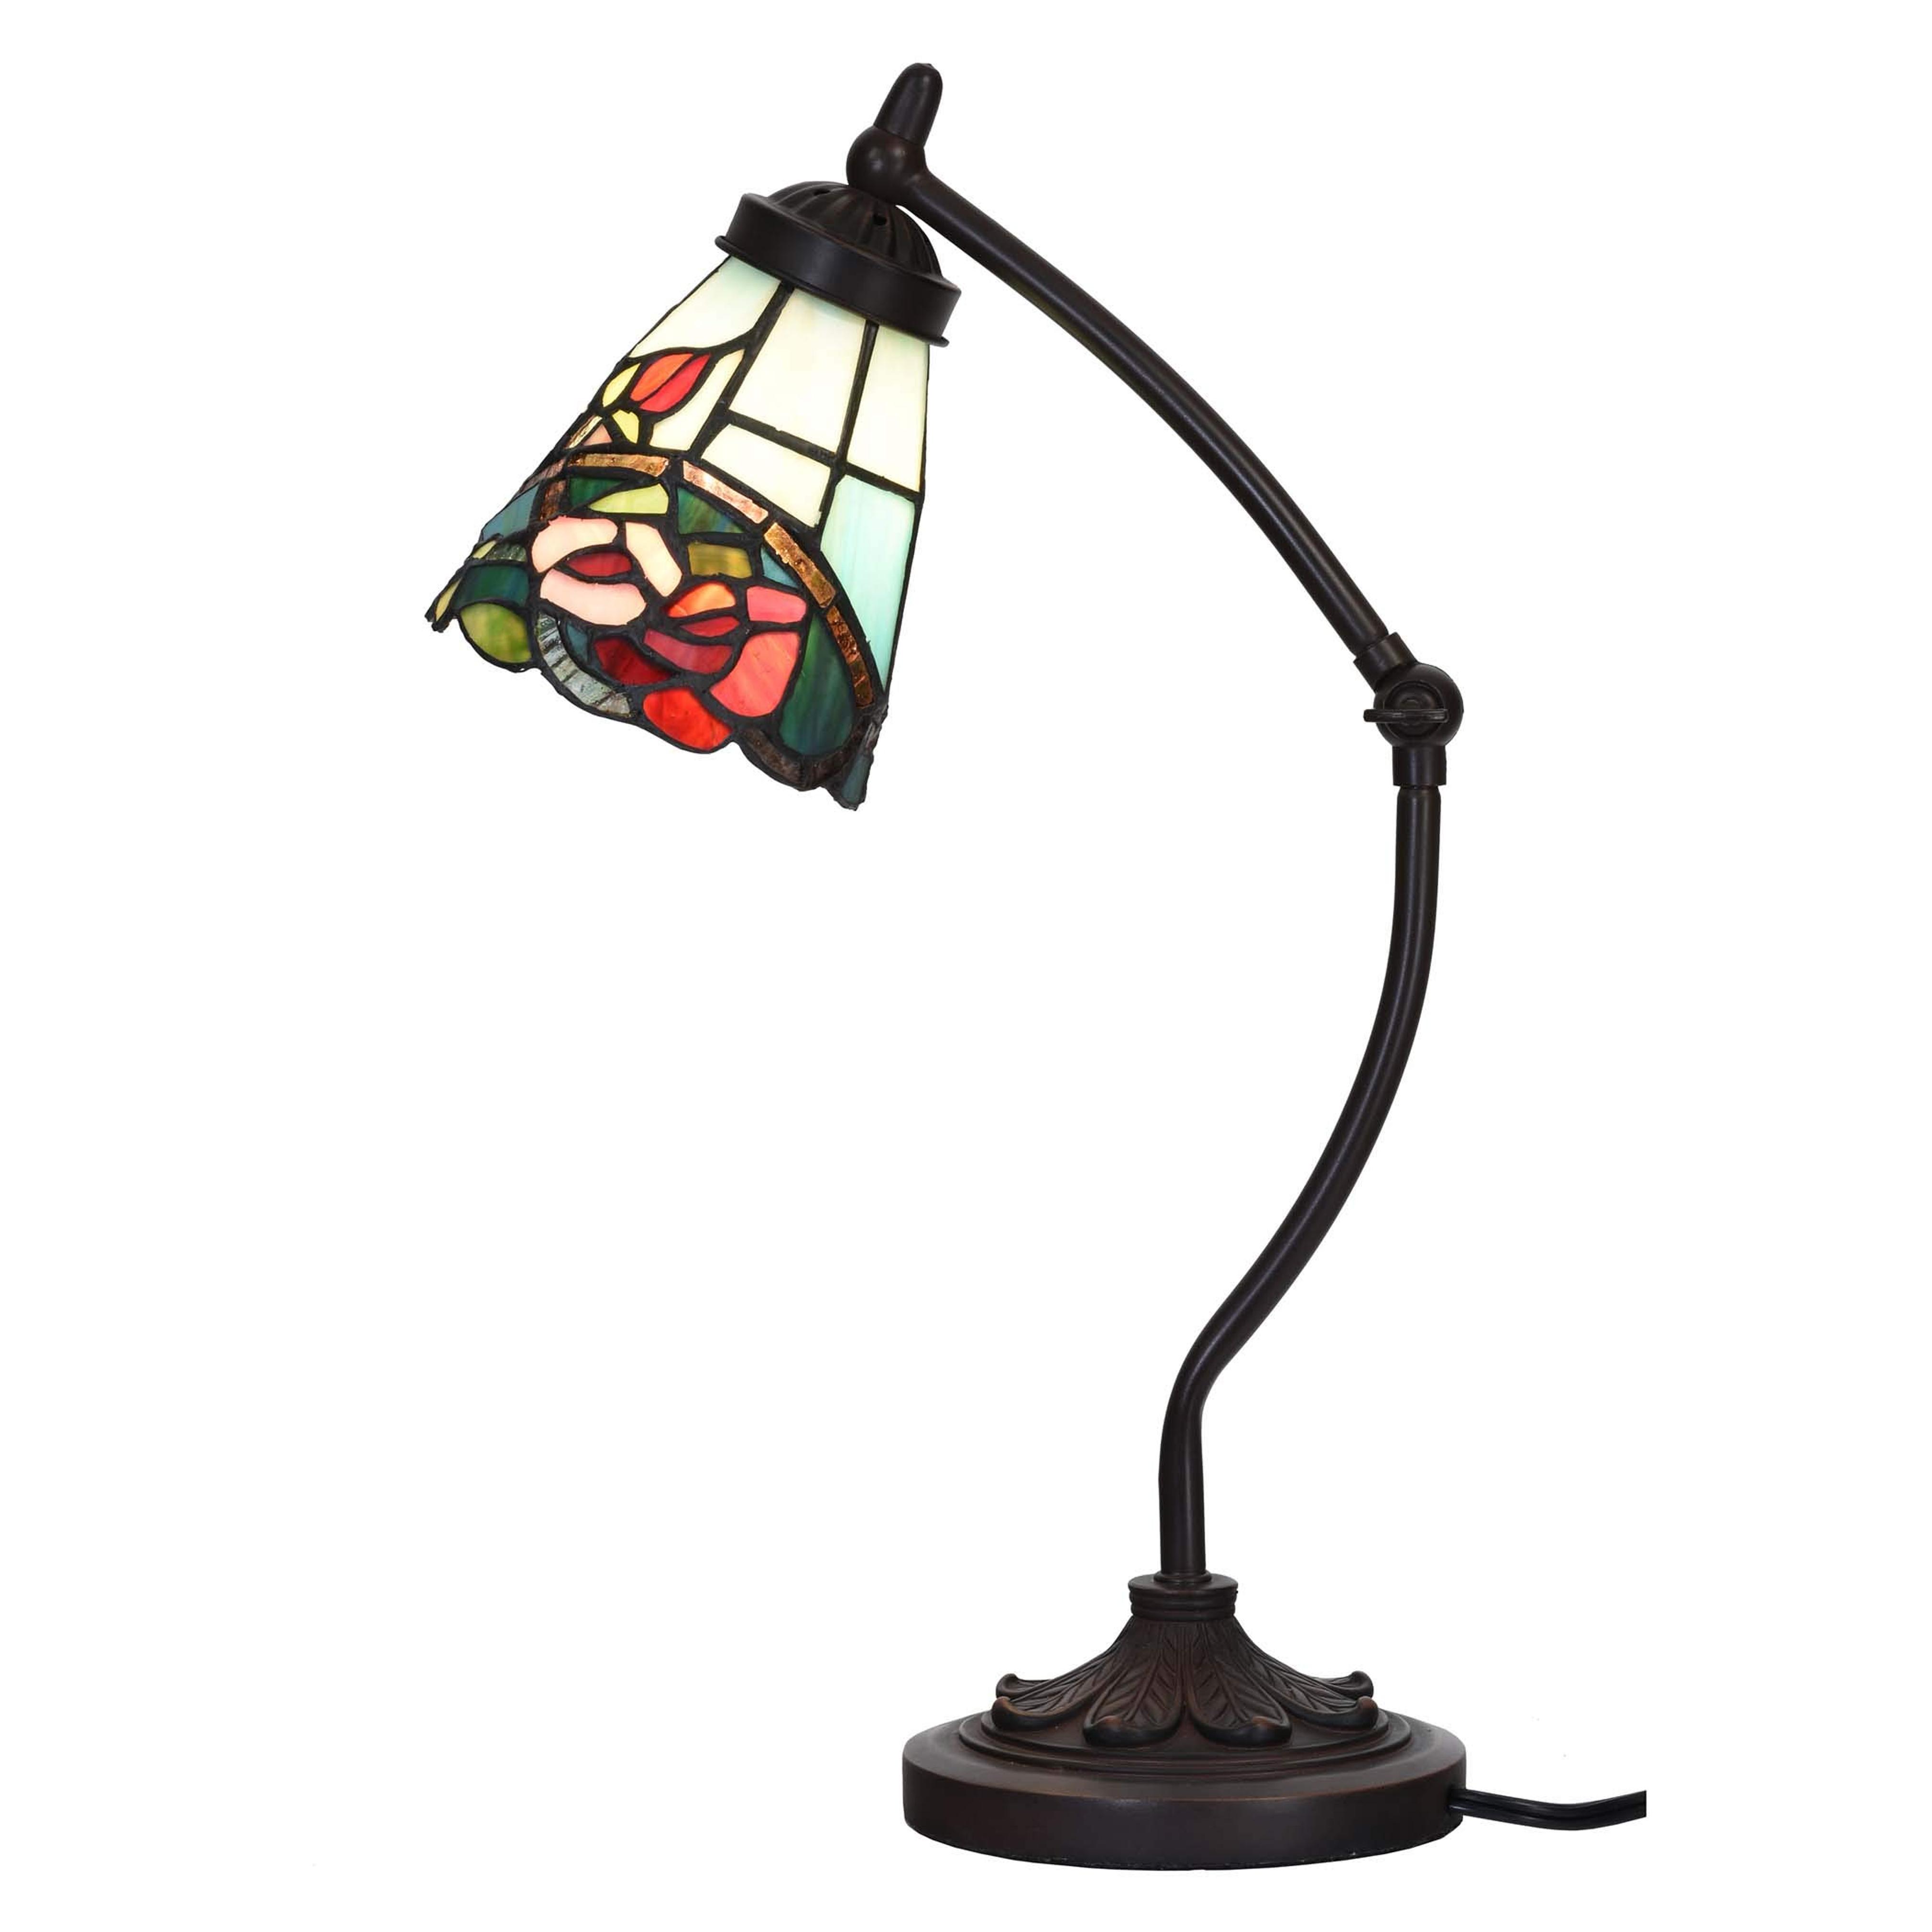 Bieye L10759 Tiffany Style Stained Glass Table Lamp Night Light with Swing Arm Base for Working Reading Home Decoration (Rose Flower) - Amazon.com